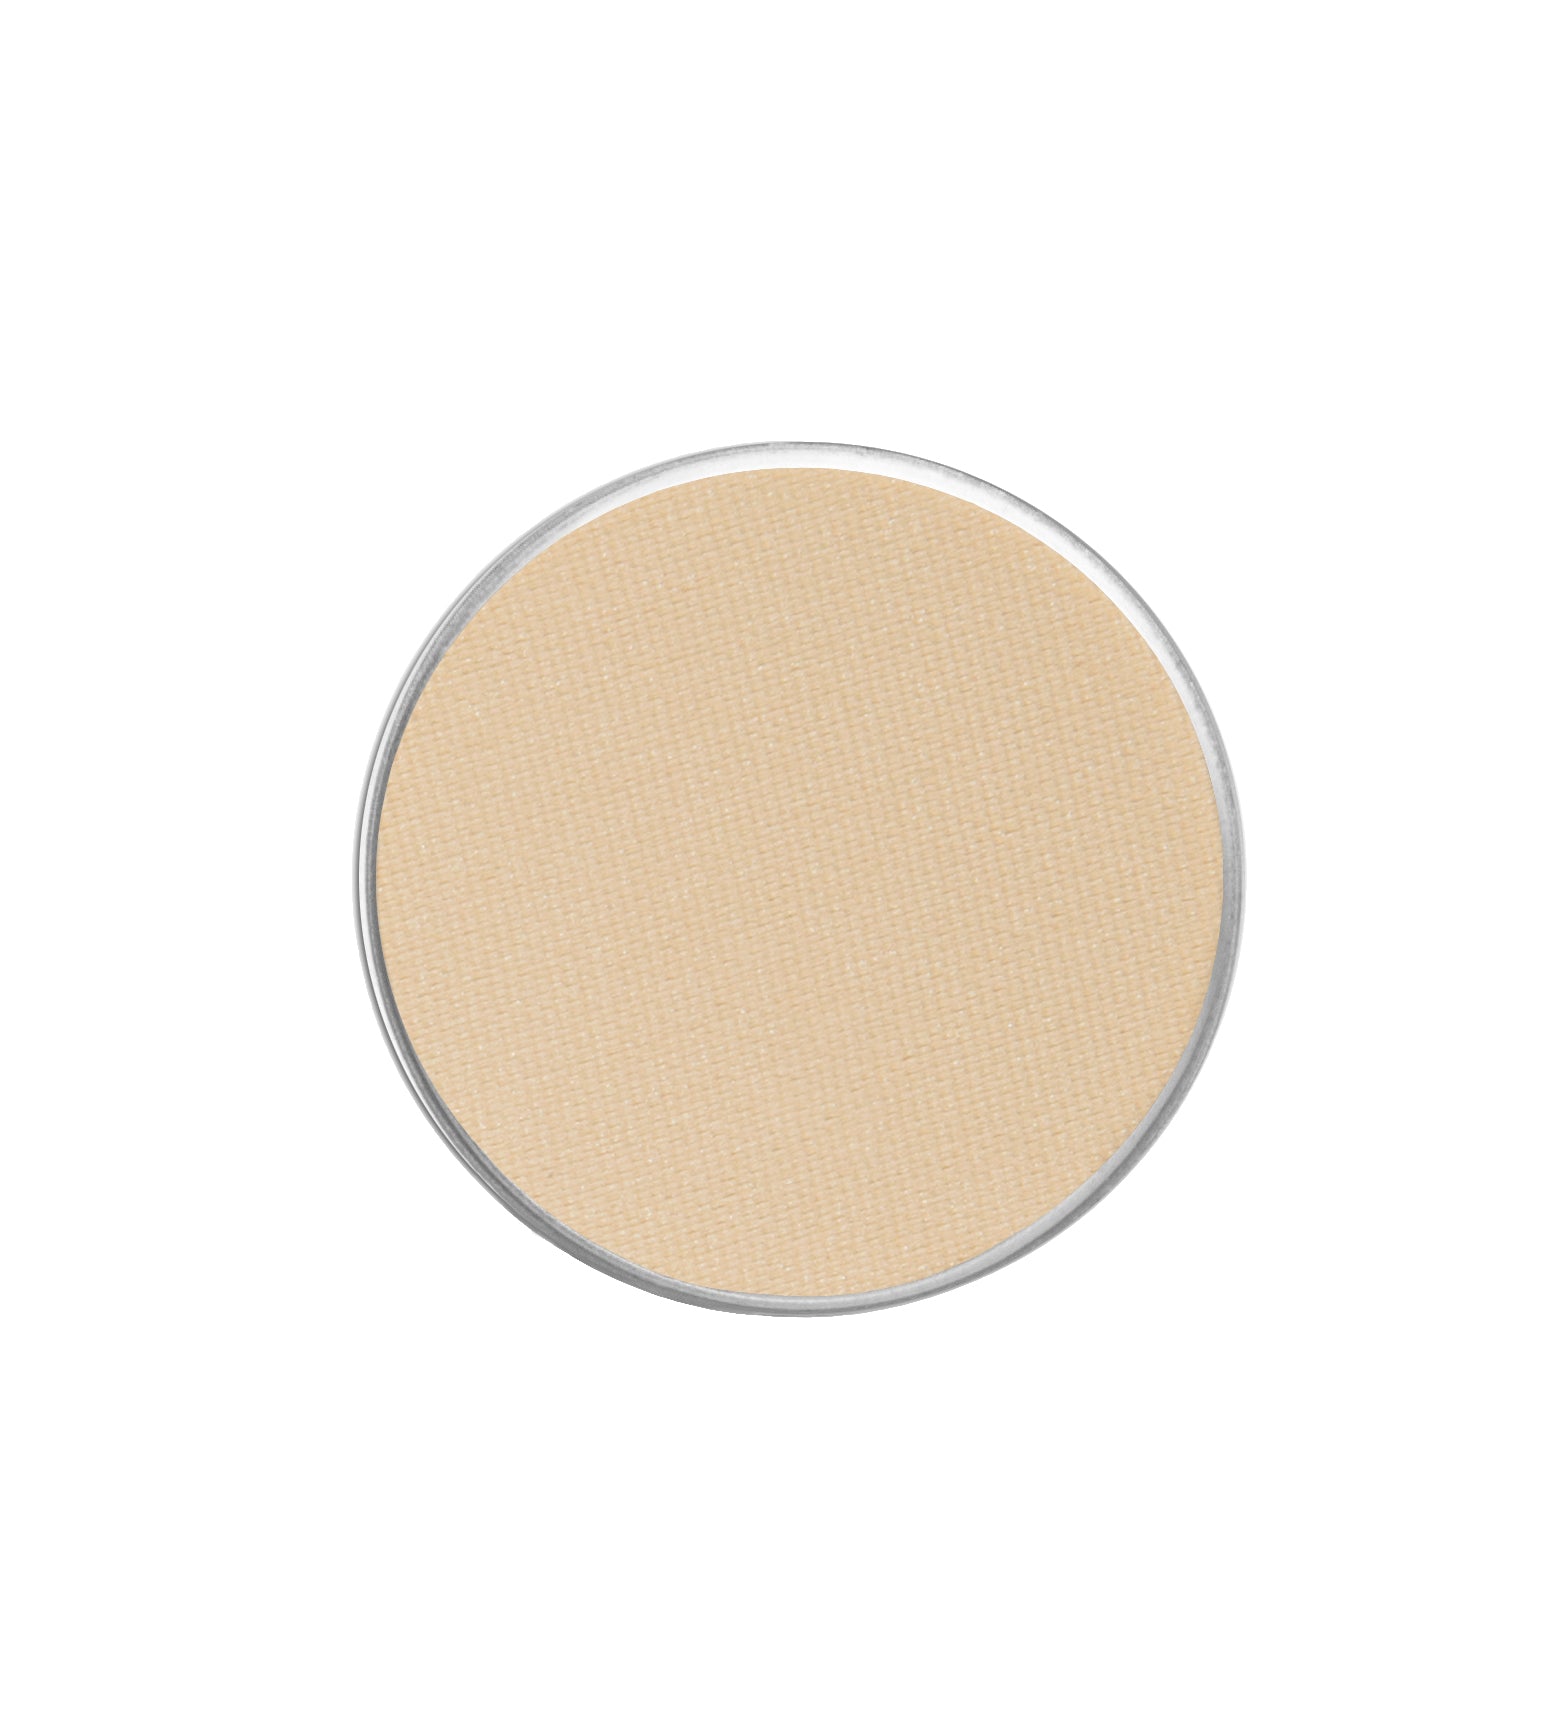 FACE atelier Eye Shadow Parchment